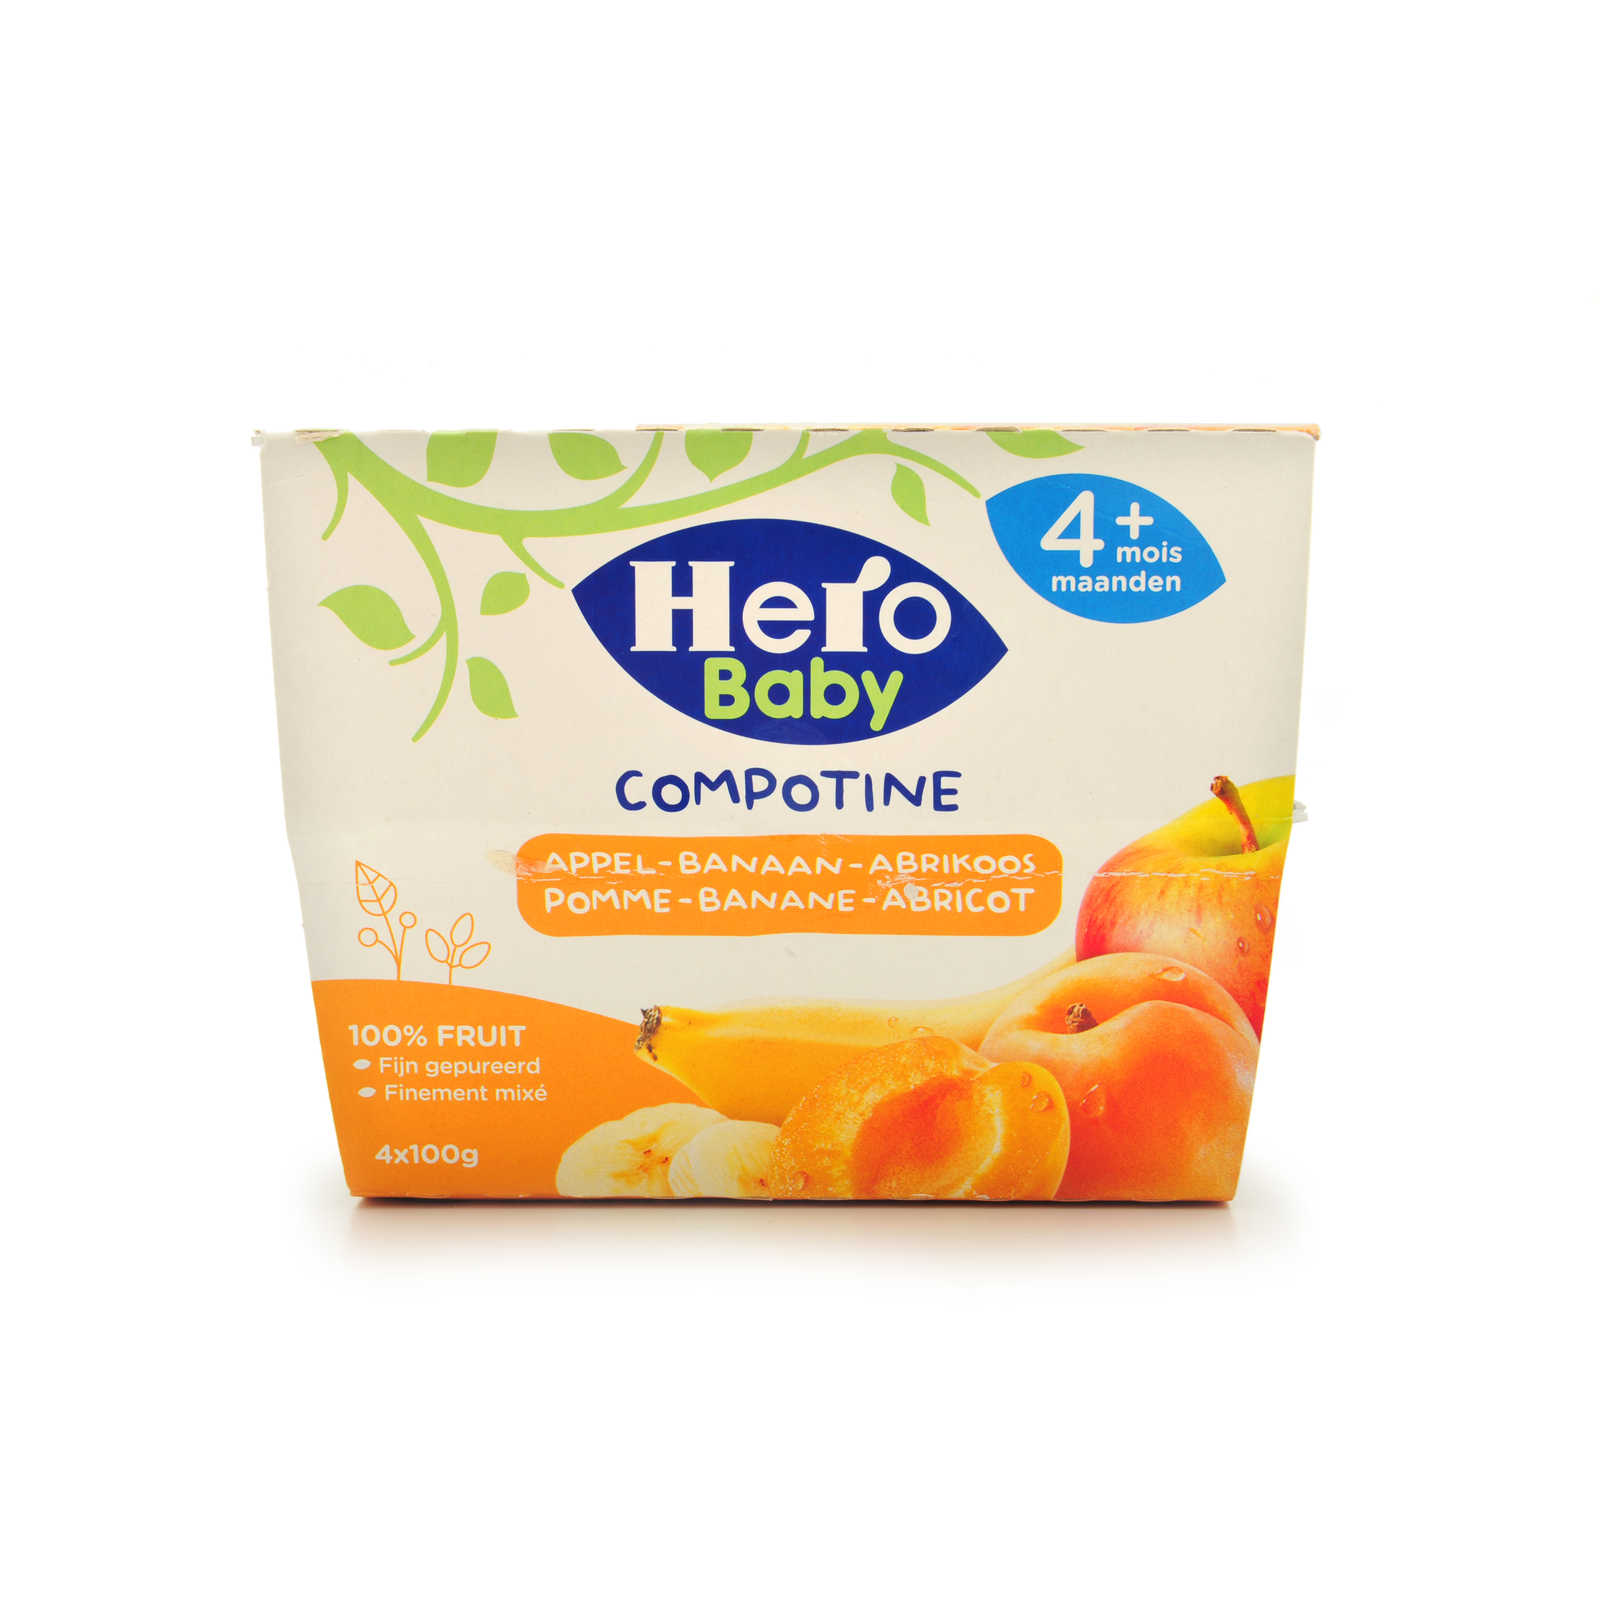 Hero Baby Baby Compote Pomme Banane Abricot 4 36 Mois Www Delhaize Be